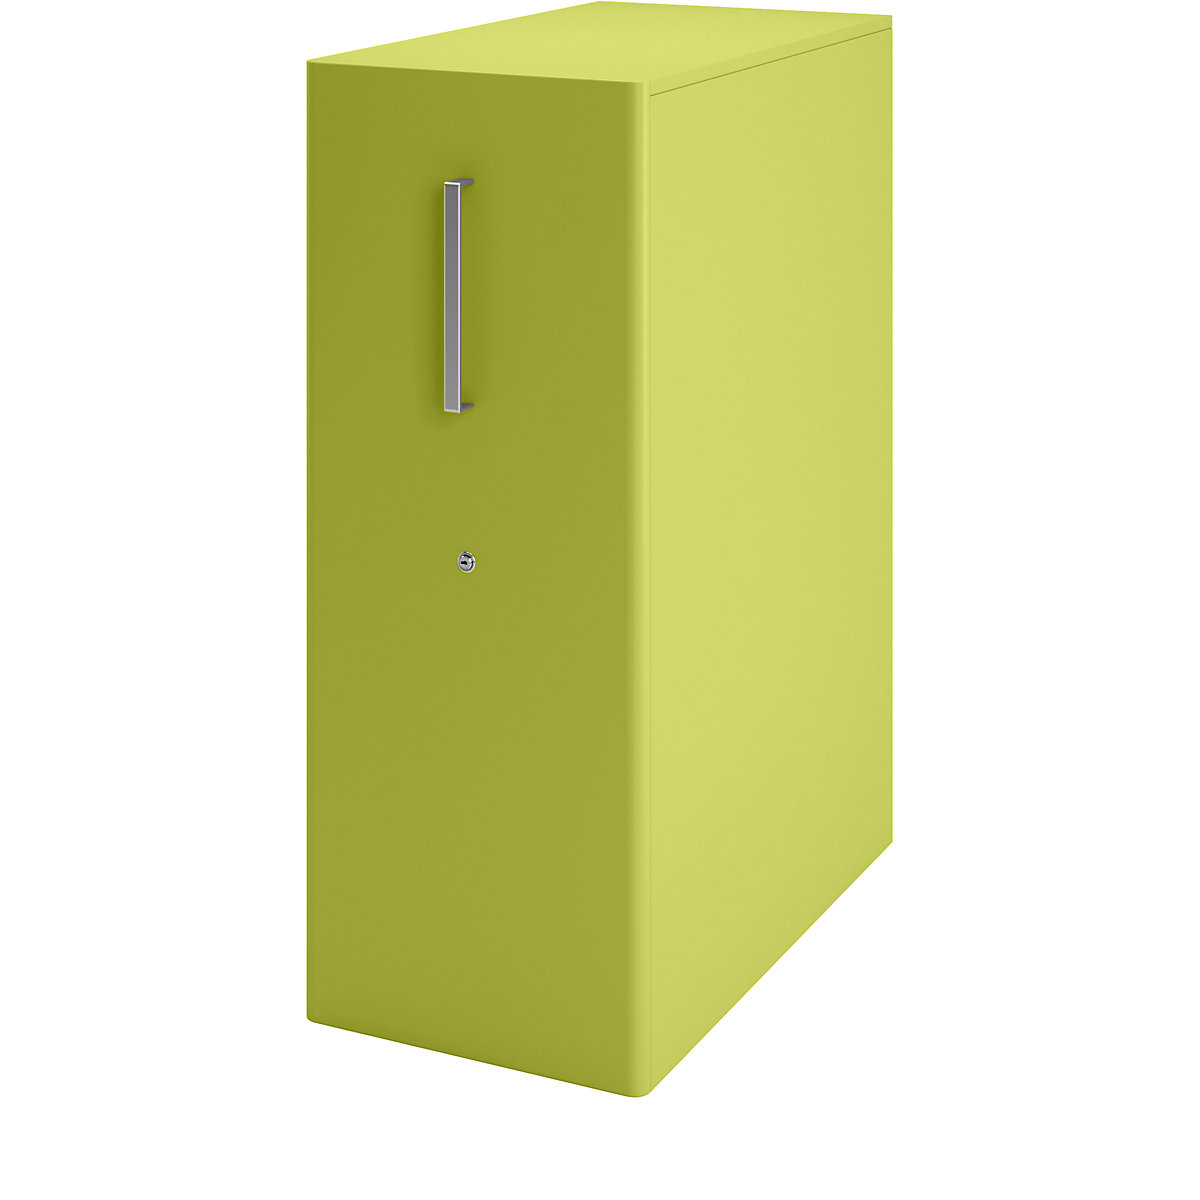 Tower™ 4 add-on furniture, with worktop – BISLEY, for the right side, 3 shelves, green-25